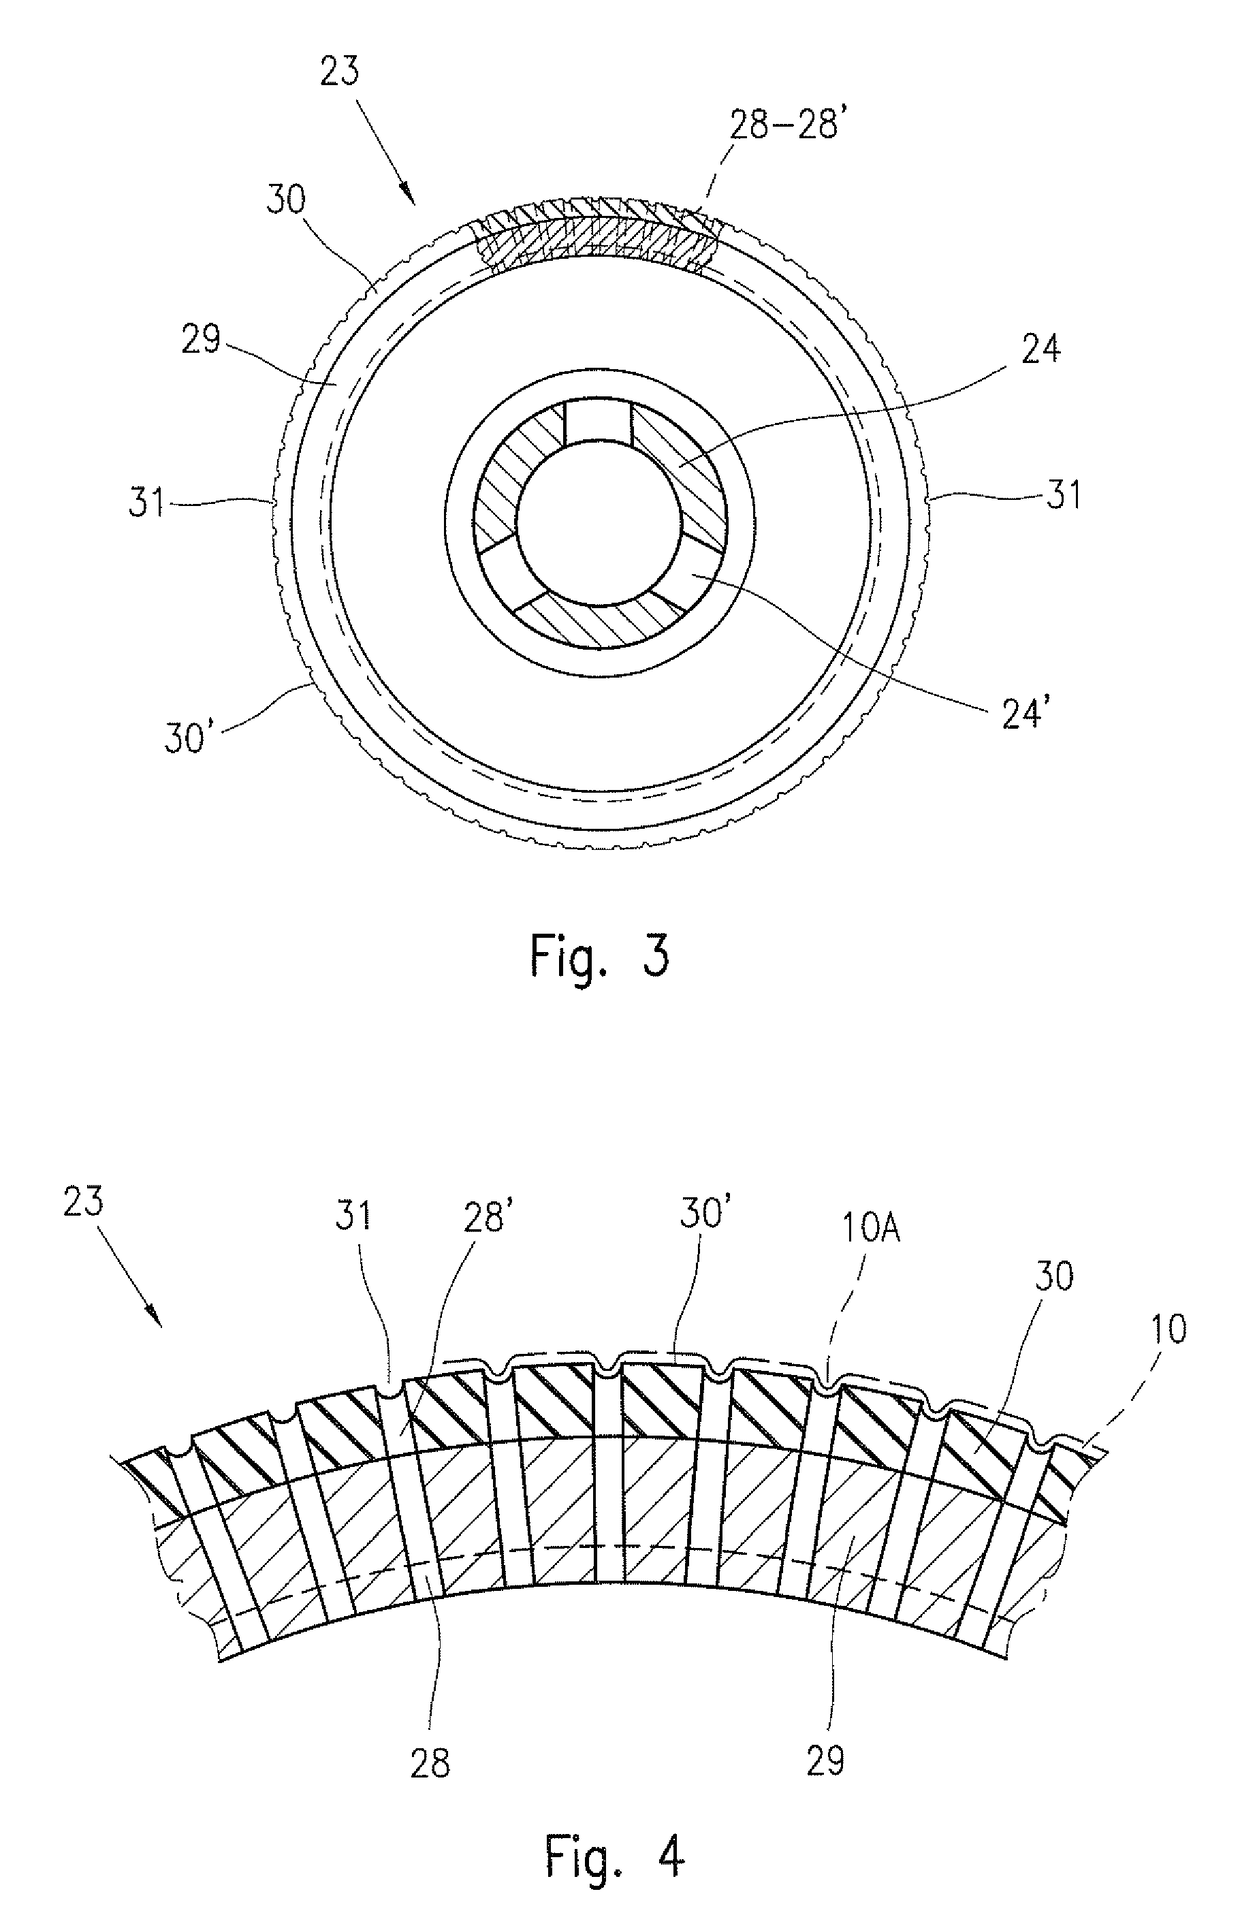 Method and apparatus for corrugating and winding up rolls of plastic film